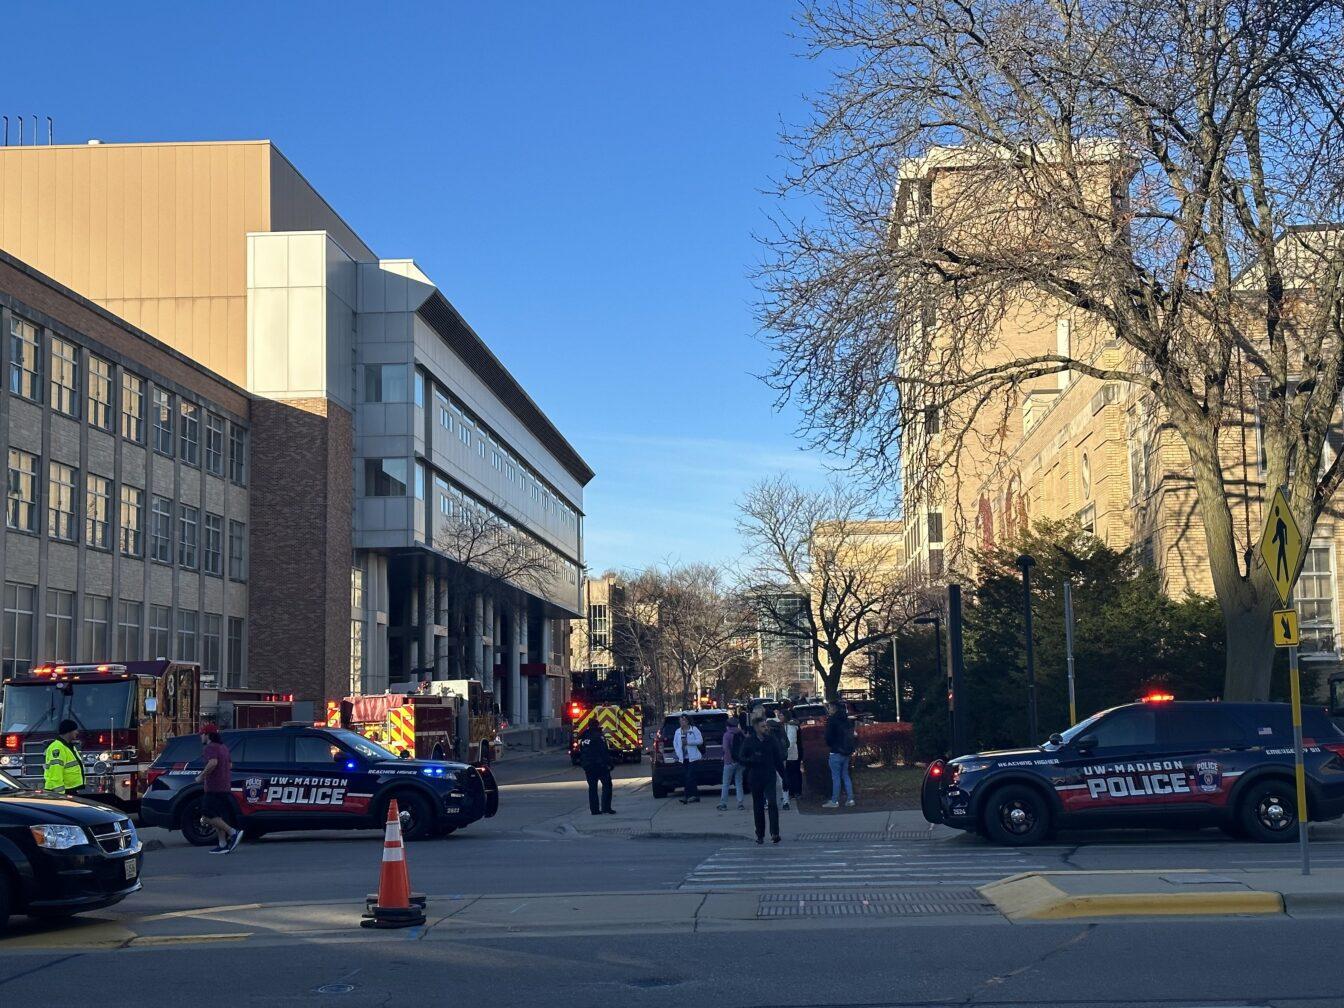 Updated: UWPD, MFD respond to fire at Engineering Hall